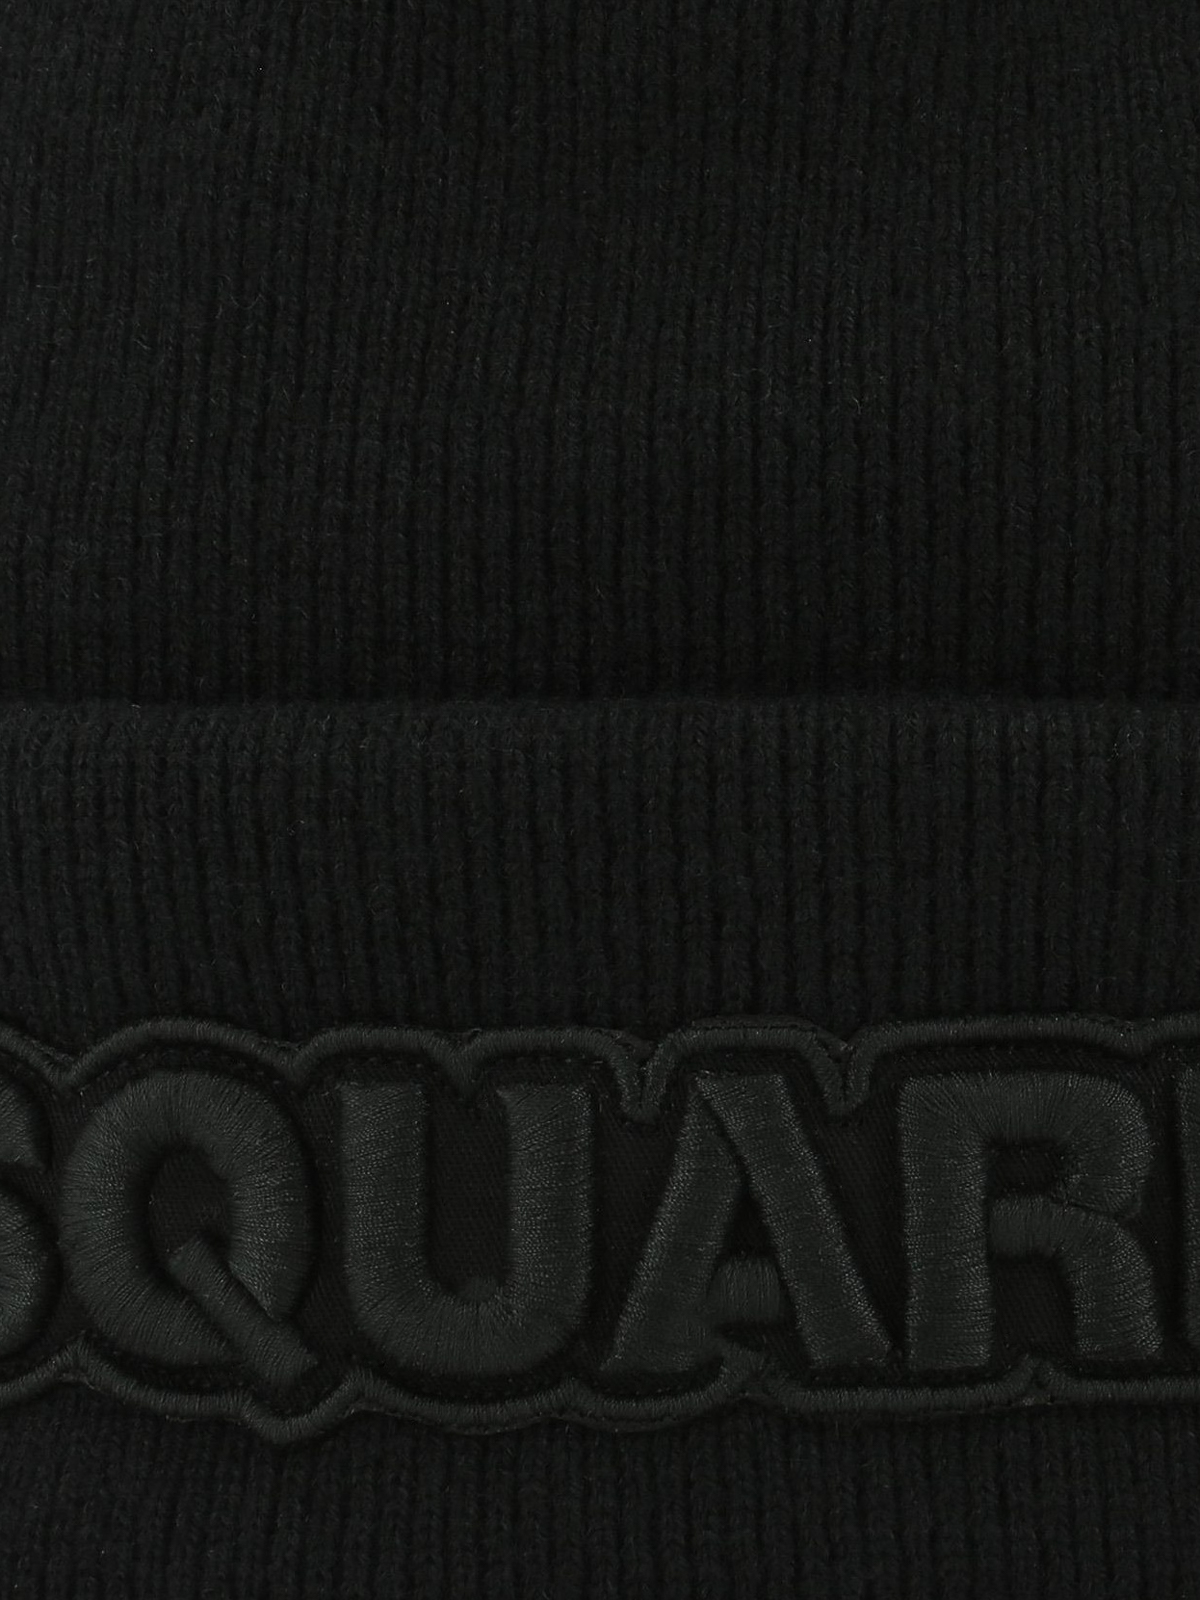 Shop Dsquared2 Black Ribbed Wool Beanie